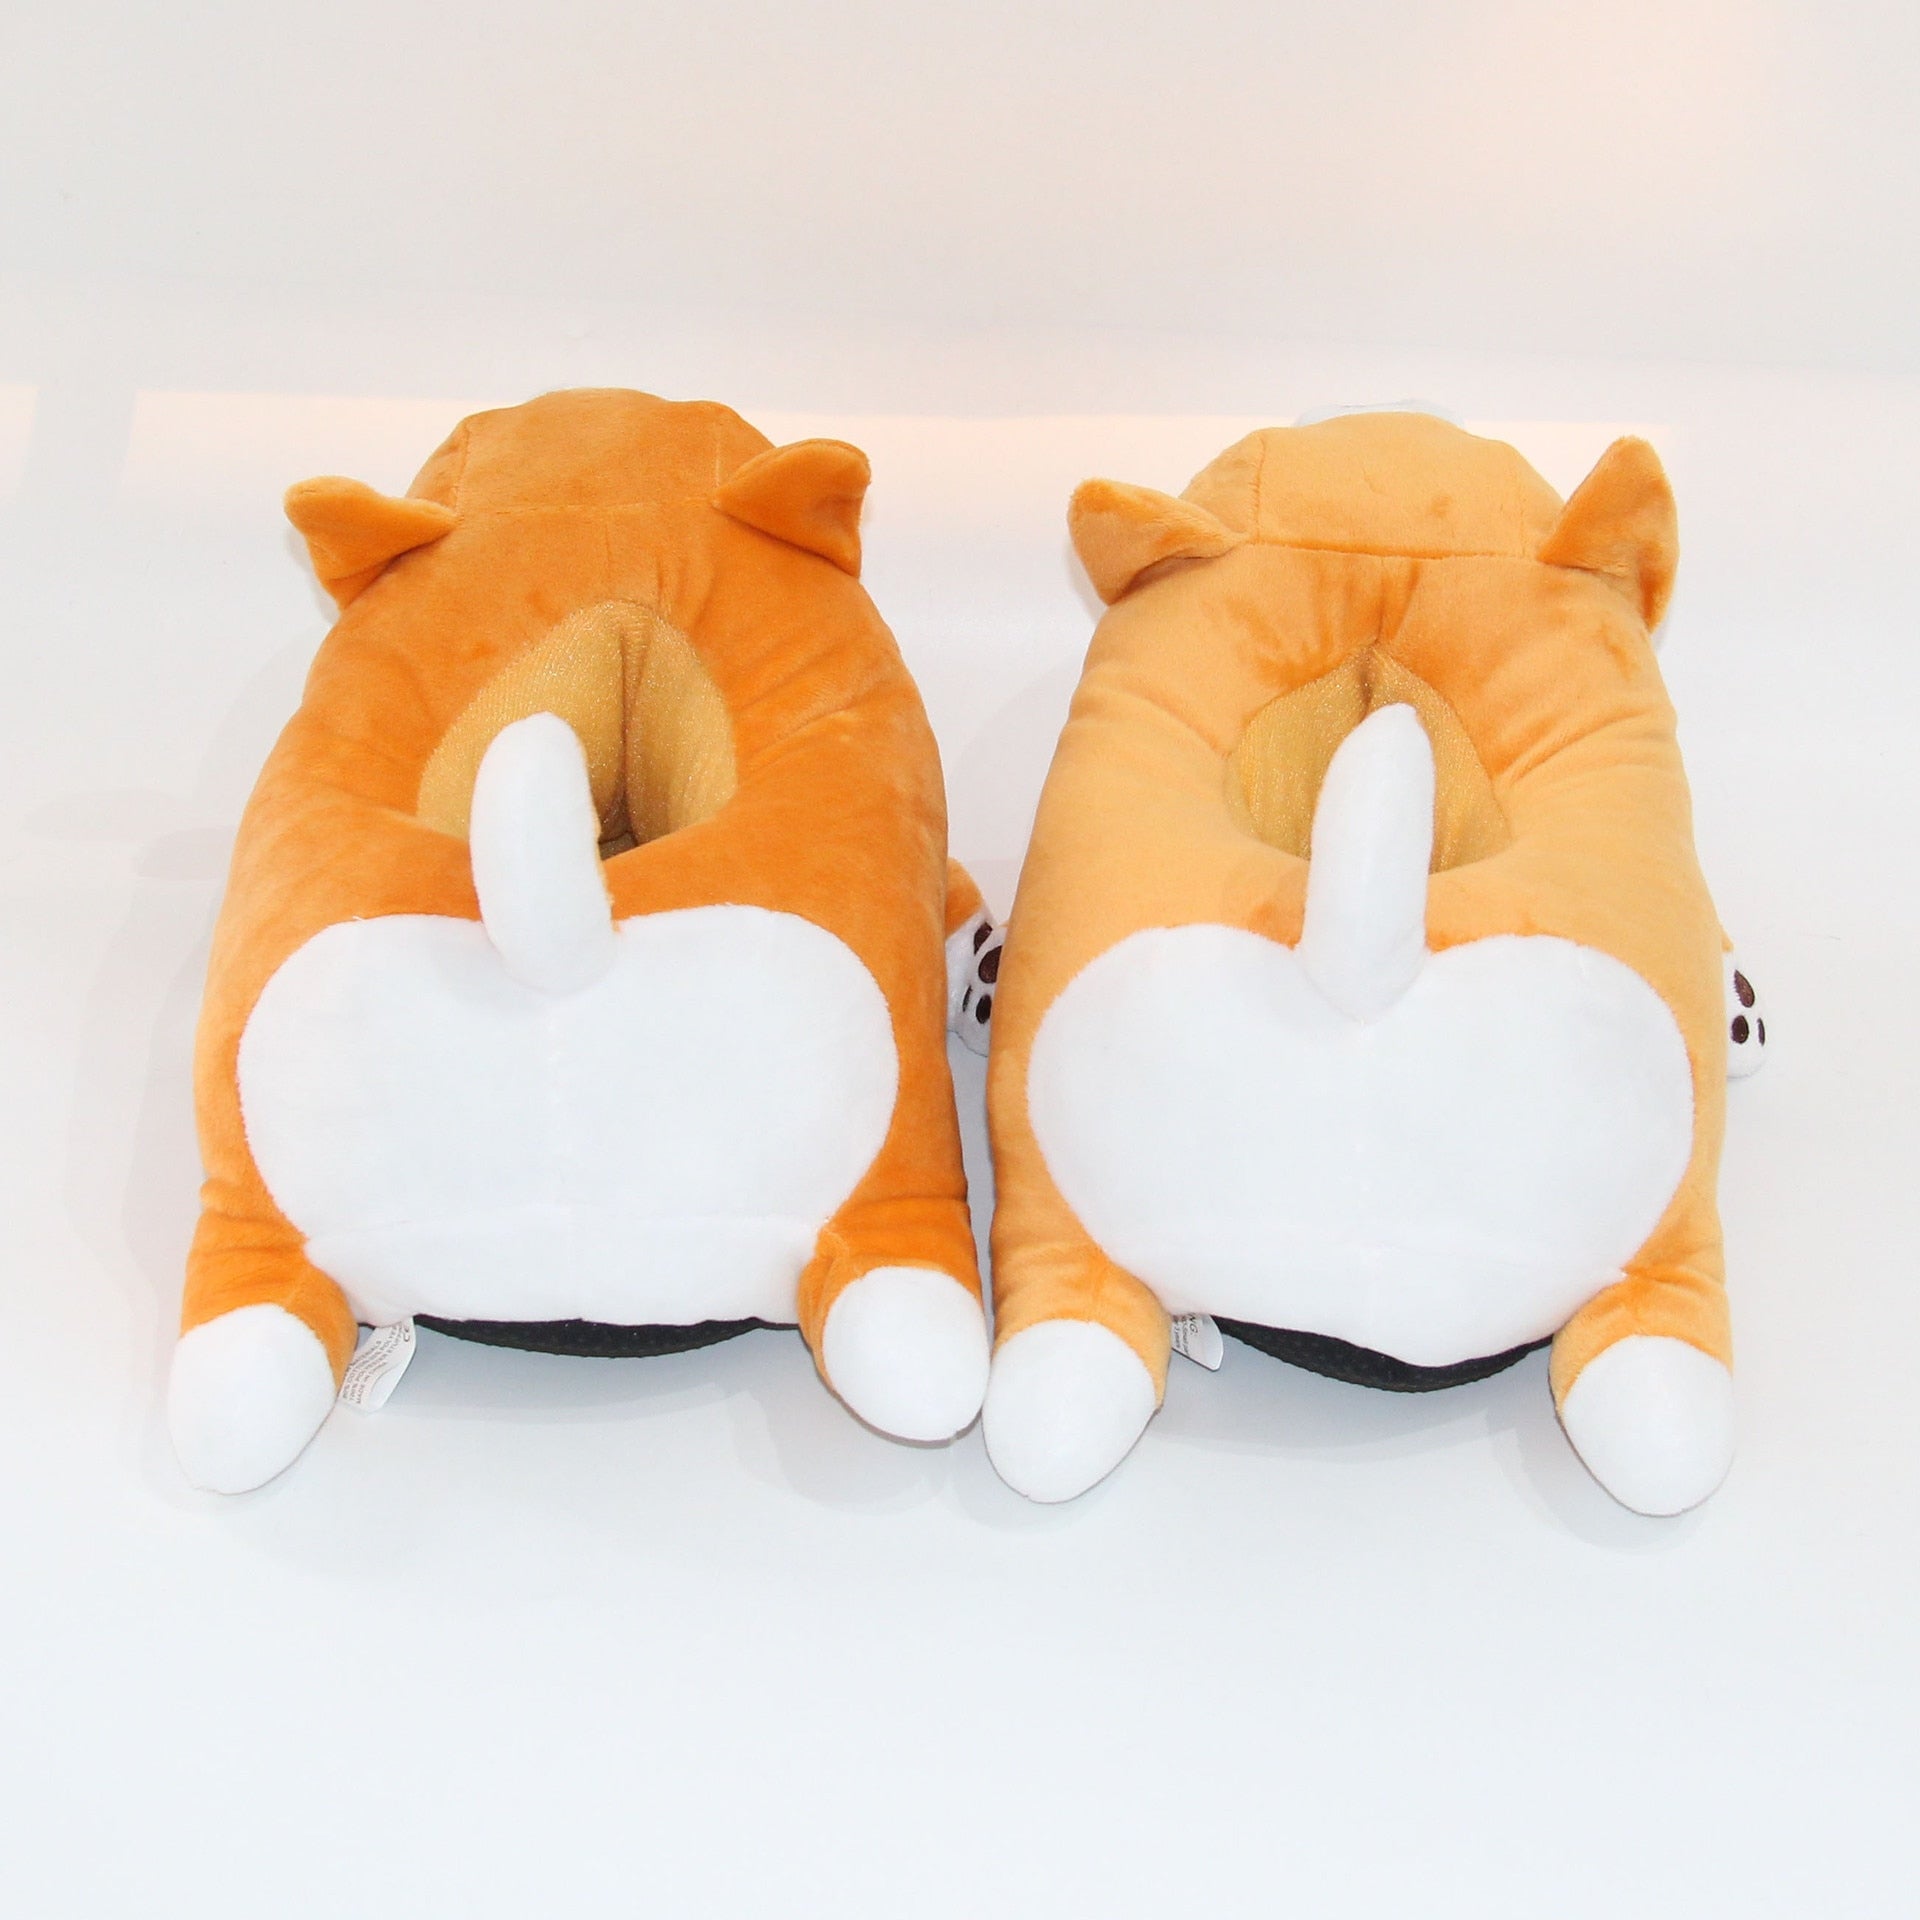 a pair of Sweetest Paw Cute Shiba Inu Dog Slippers on a white surface.